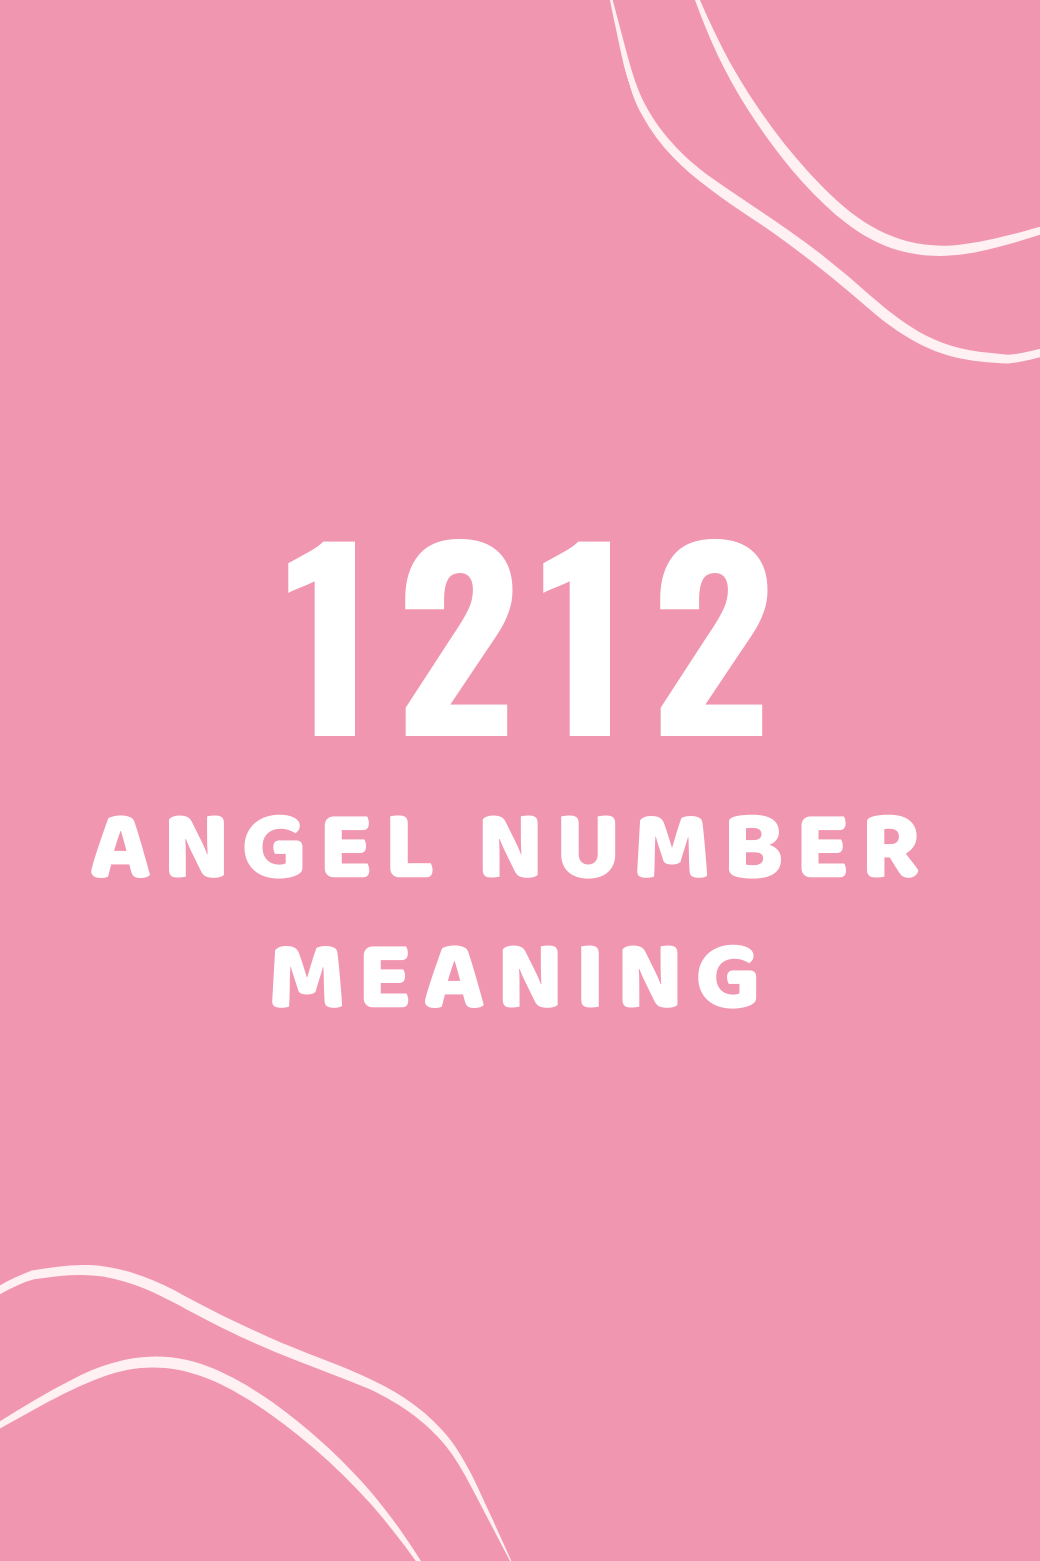 1212 Angel Number Meaning